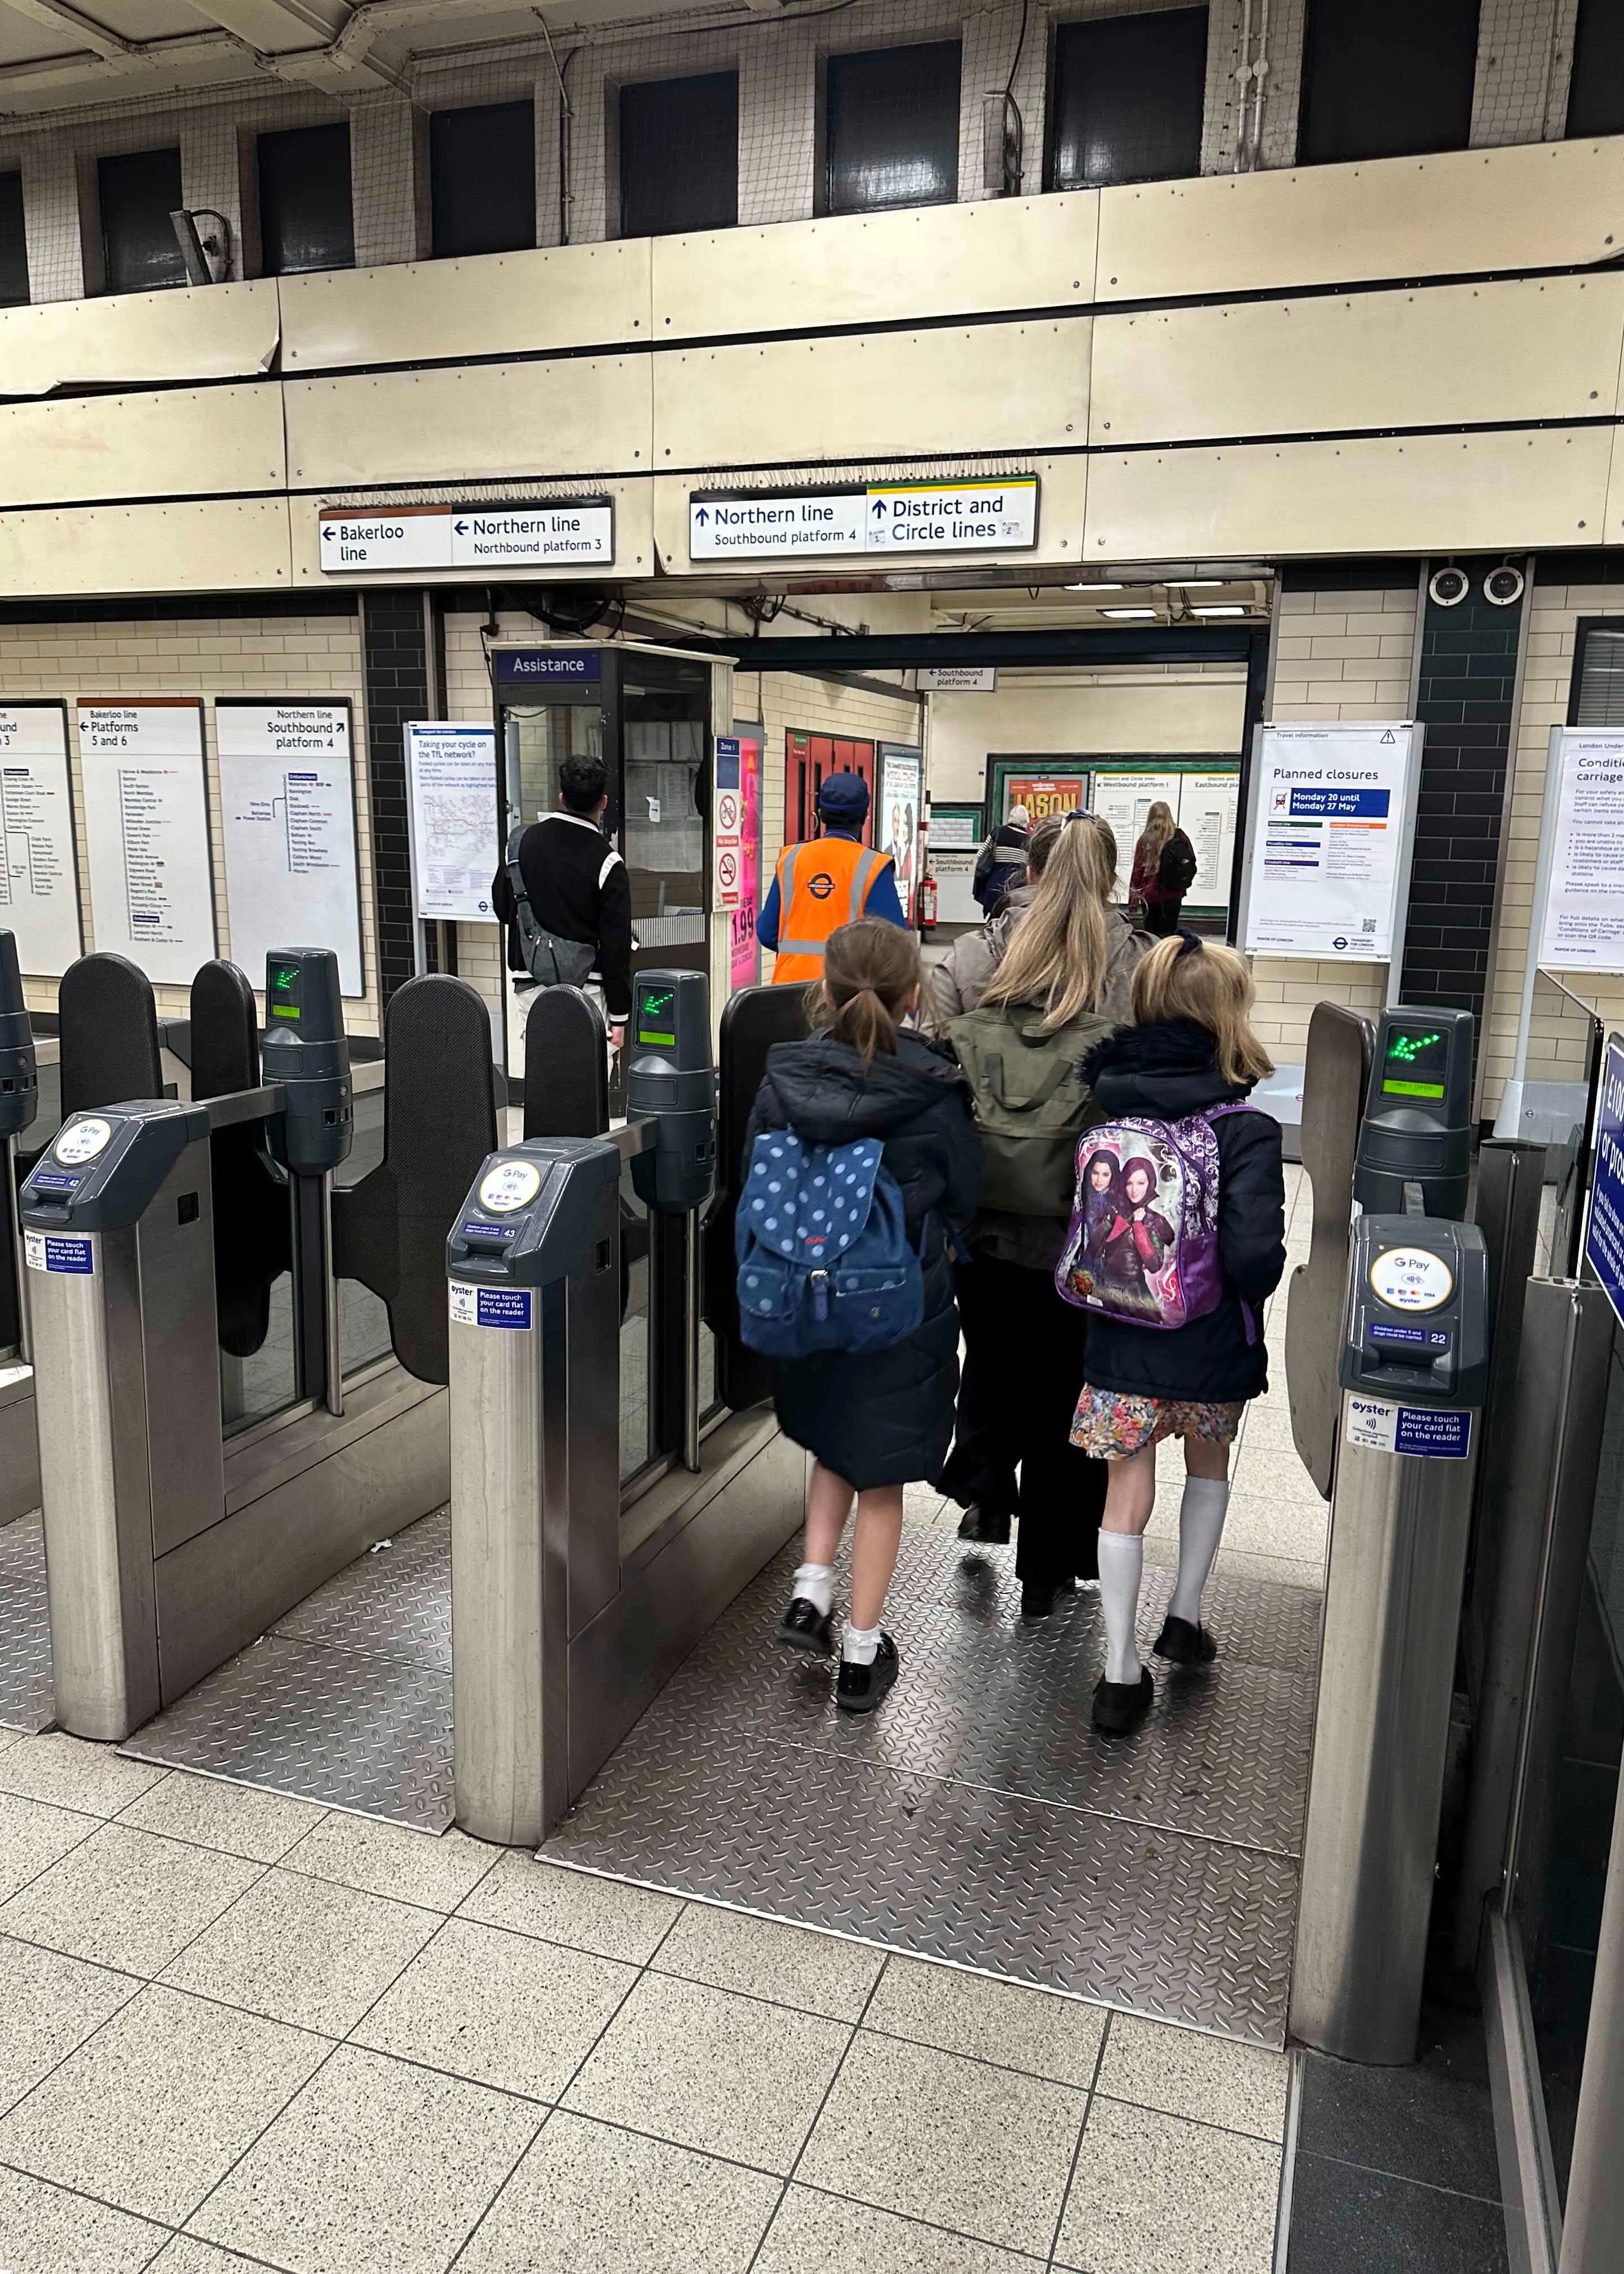 Prep 4 pupils going through the ticket holder at a tube station | Ibstock Place School, a private school near Richmond, Barnes, Putney, Kingston, and Wandsworth on an overseas trip. 